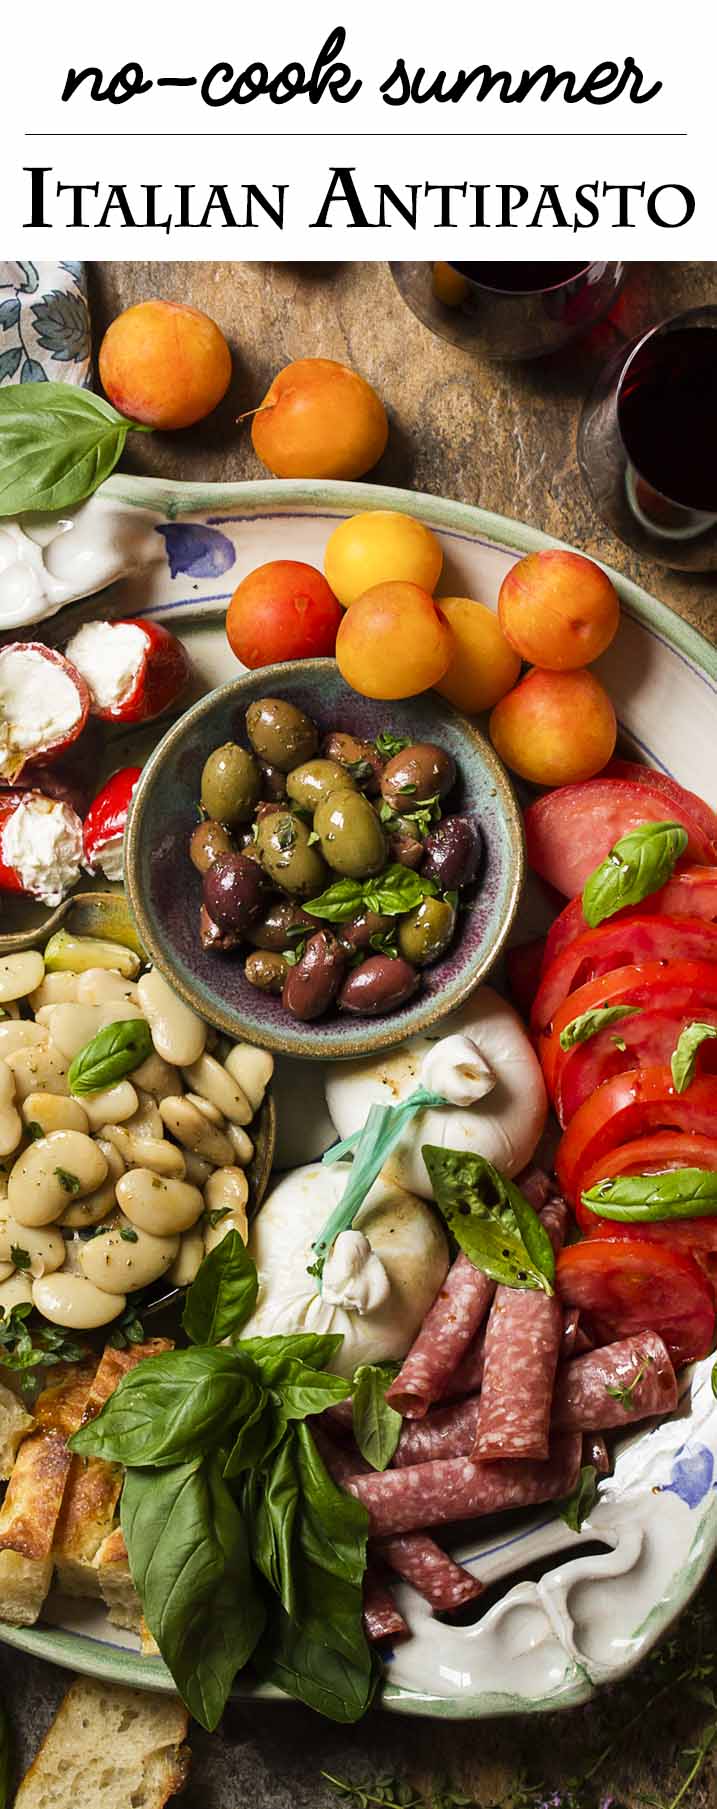 No cooking required! I love this easy Italian cold antipasto platter for summer's evenings when I want something simple for dinner. Great for two and can scale up for a crowd. | justalittlebitofbacon.com